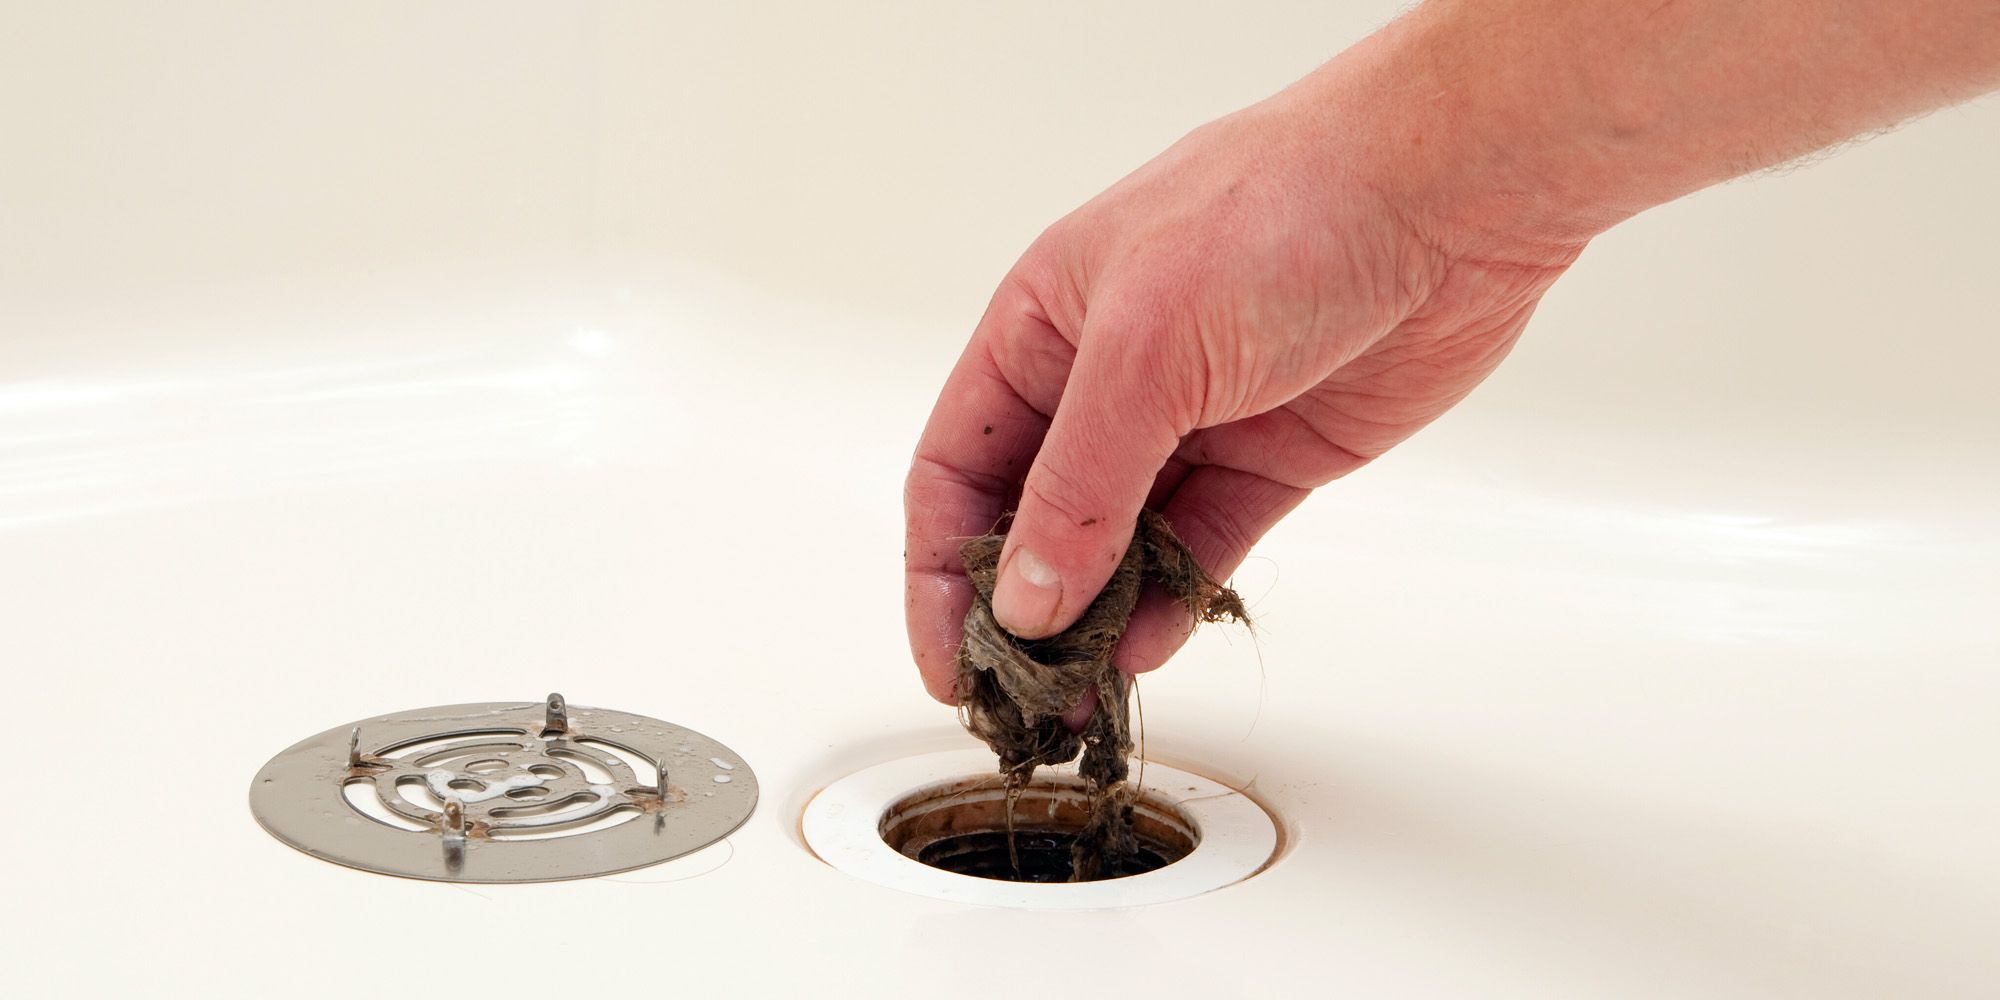 How To Prevent Clogged Drains, How To Keep Hair Out Of Bathtub Drain